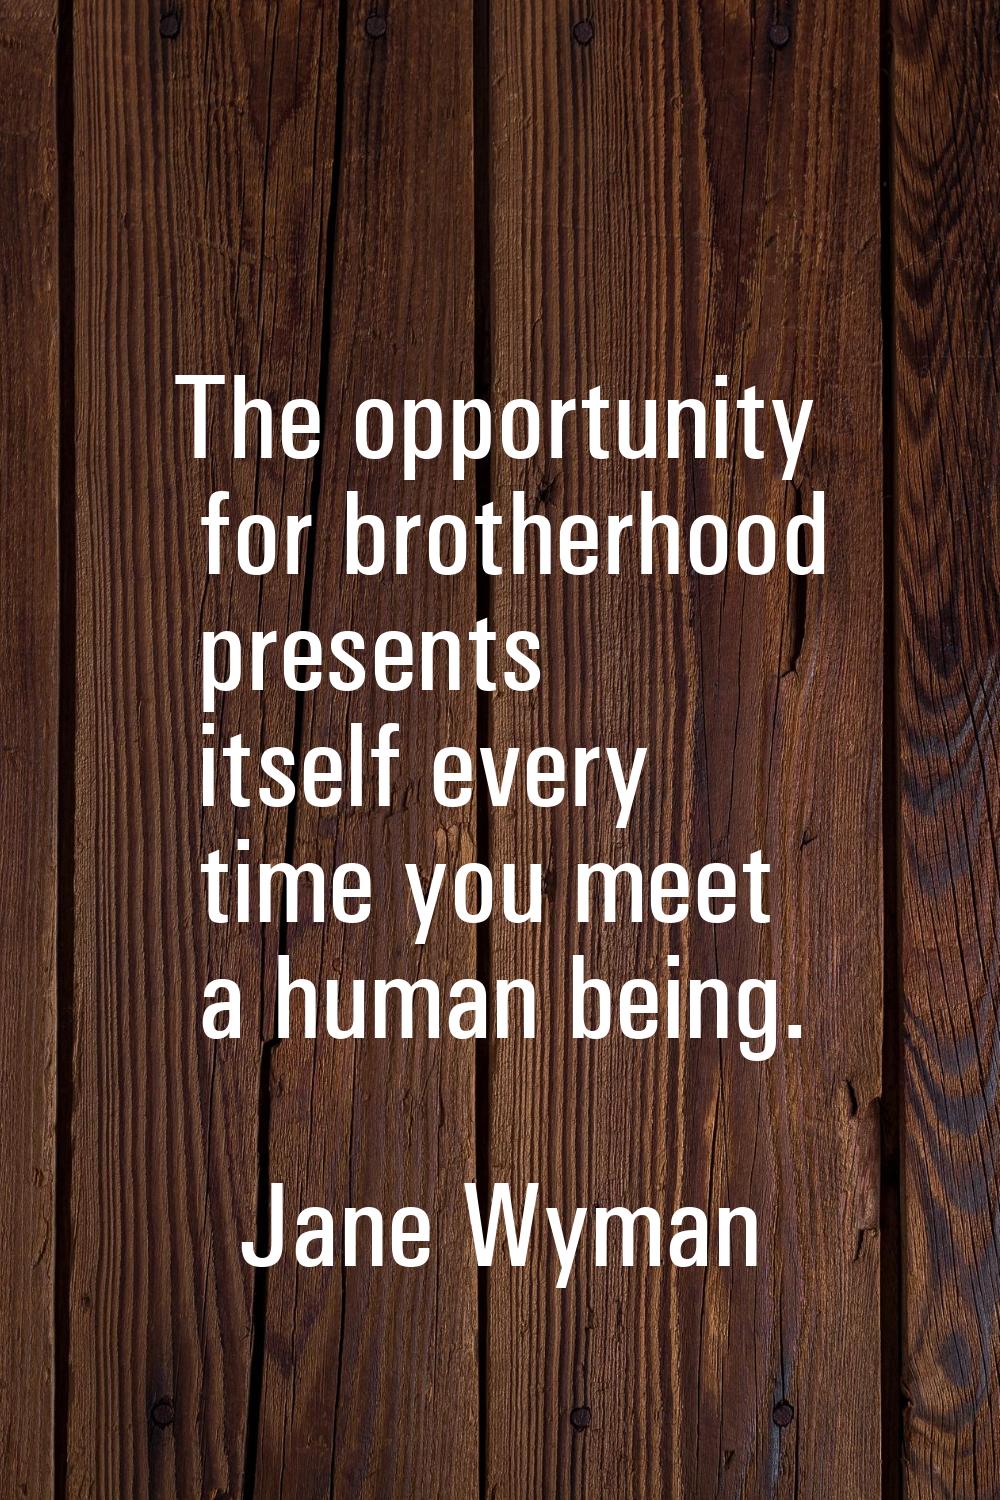 The opportunity for brotherhood presents itself every time you meet a human being.